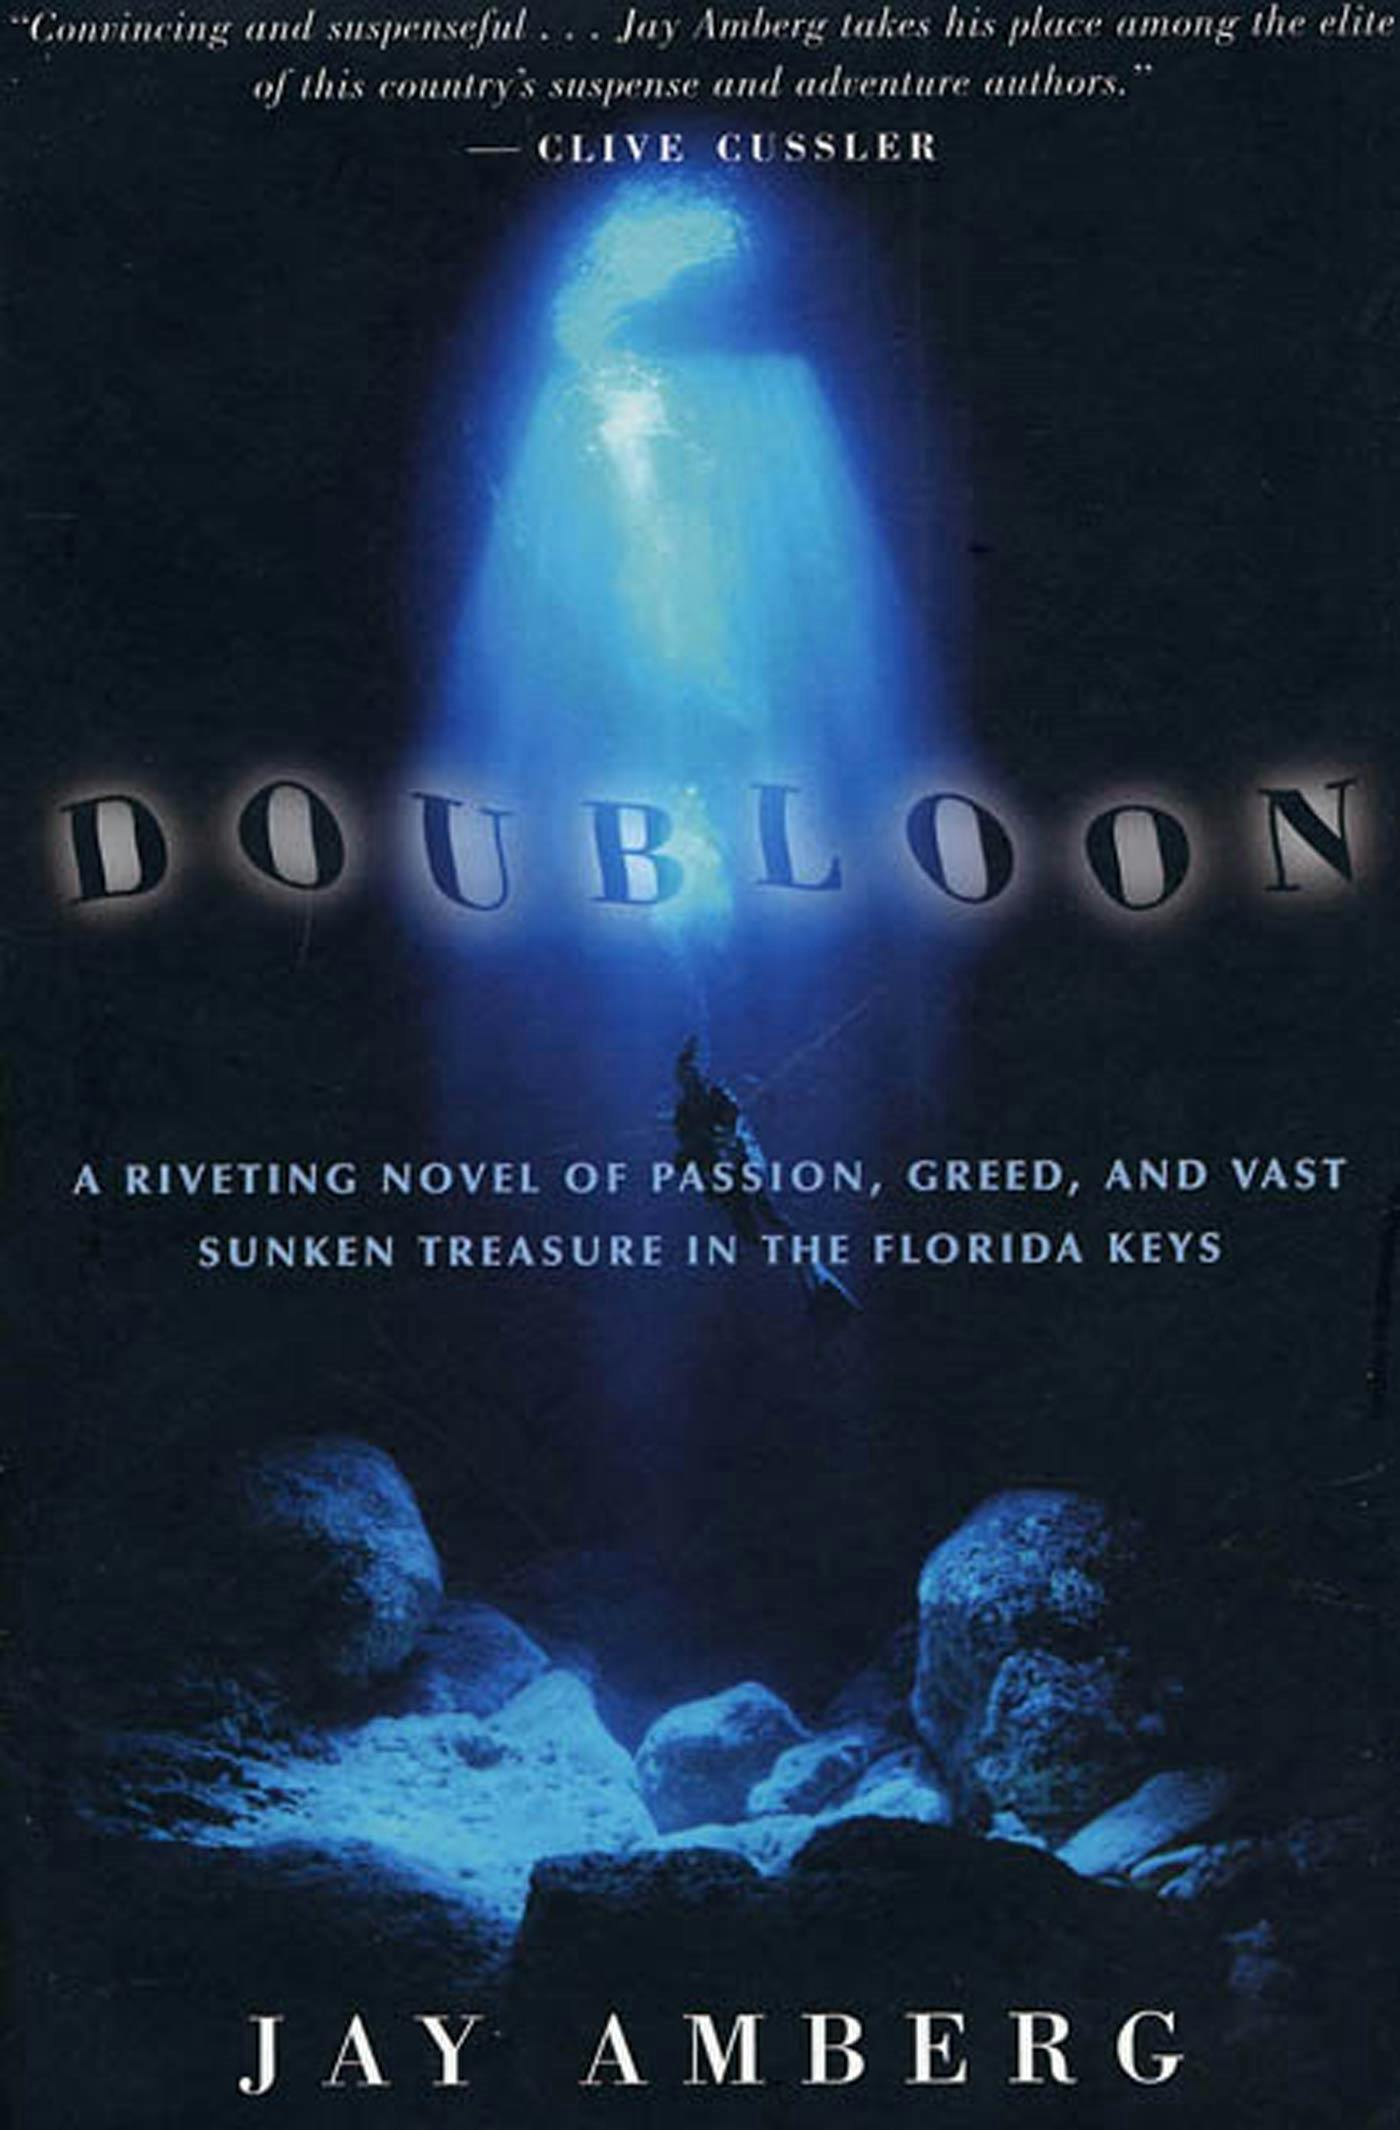 Cover for the book titled as: Doubloon